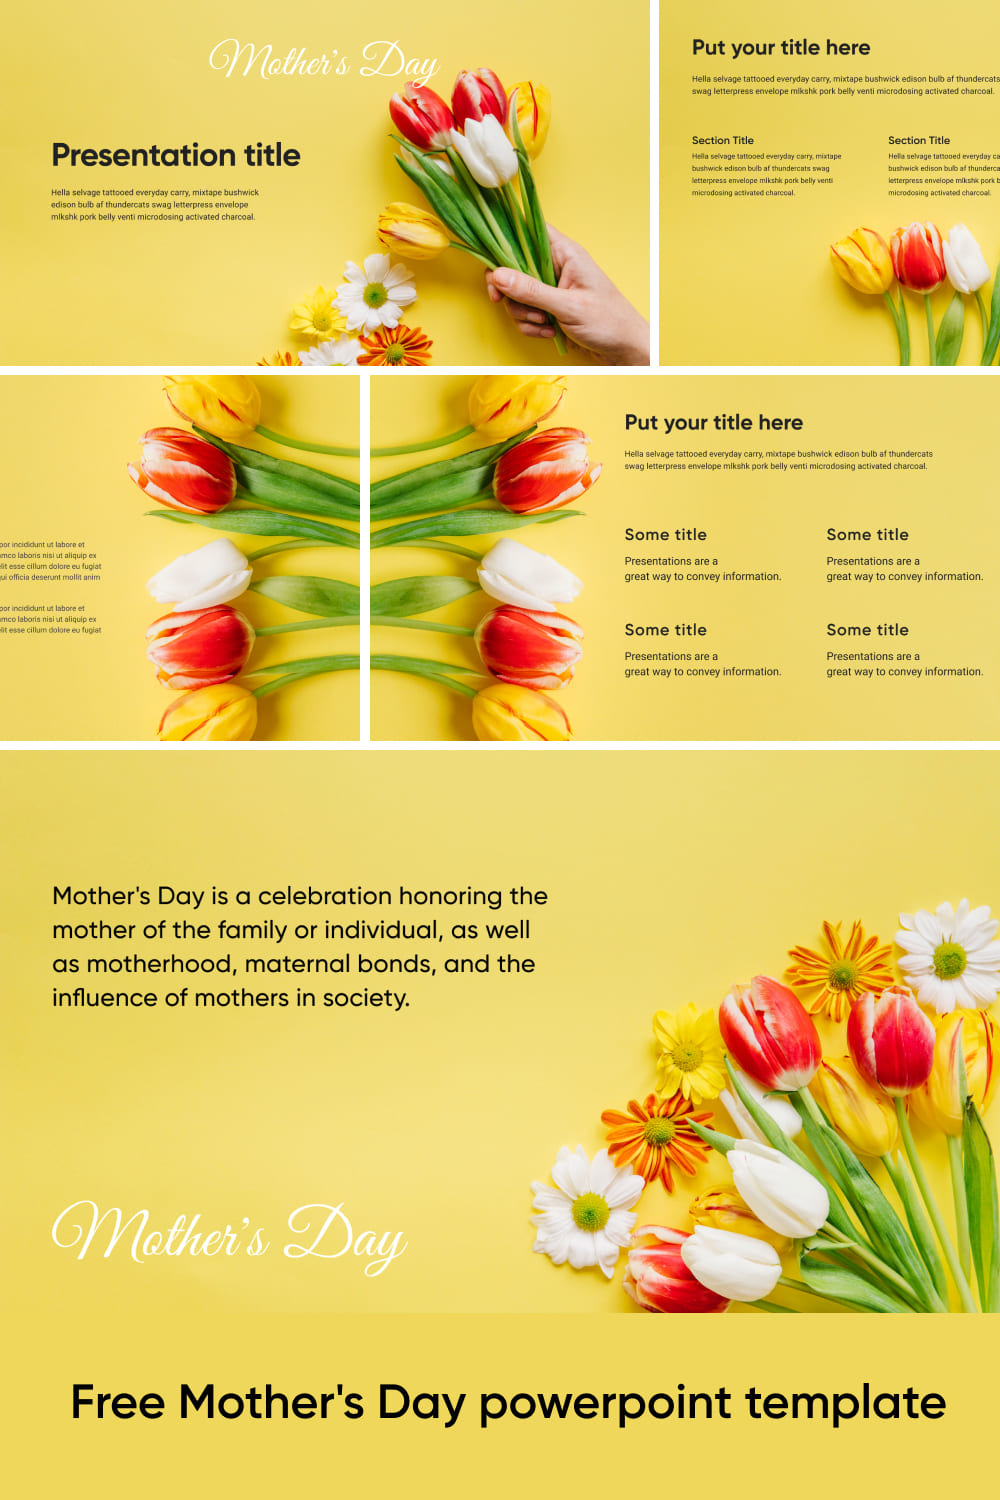 Pint Free Mothers Day Powerpoint Template.